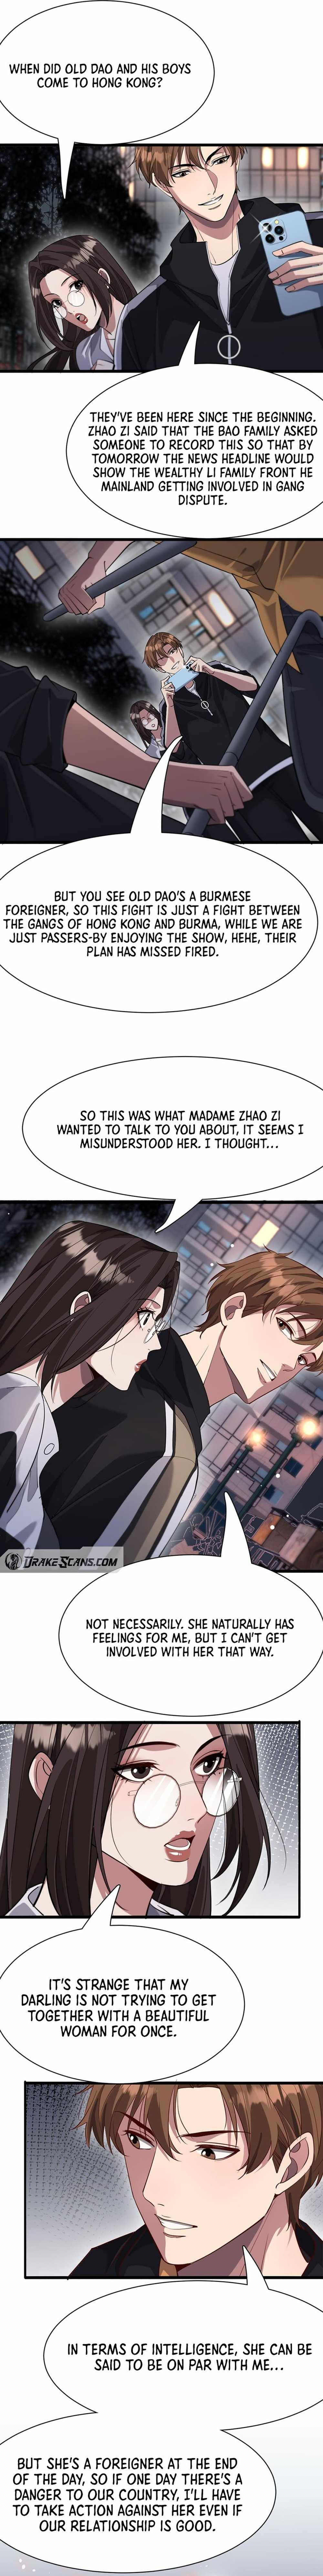 read I’m Trapped In This Day For One Thousand Years Chapter 93 Manga Online Free at Mangabuddy, MangaNato,Manhwatop | MangaSo.com